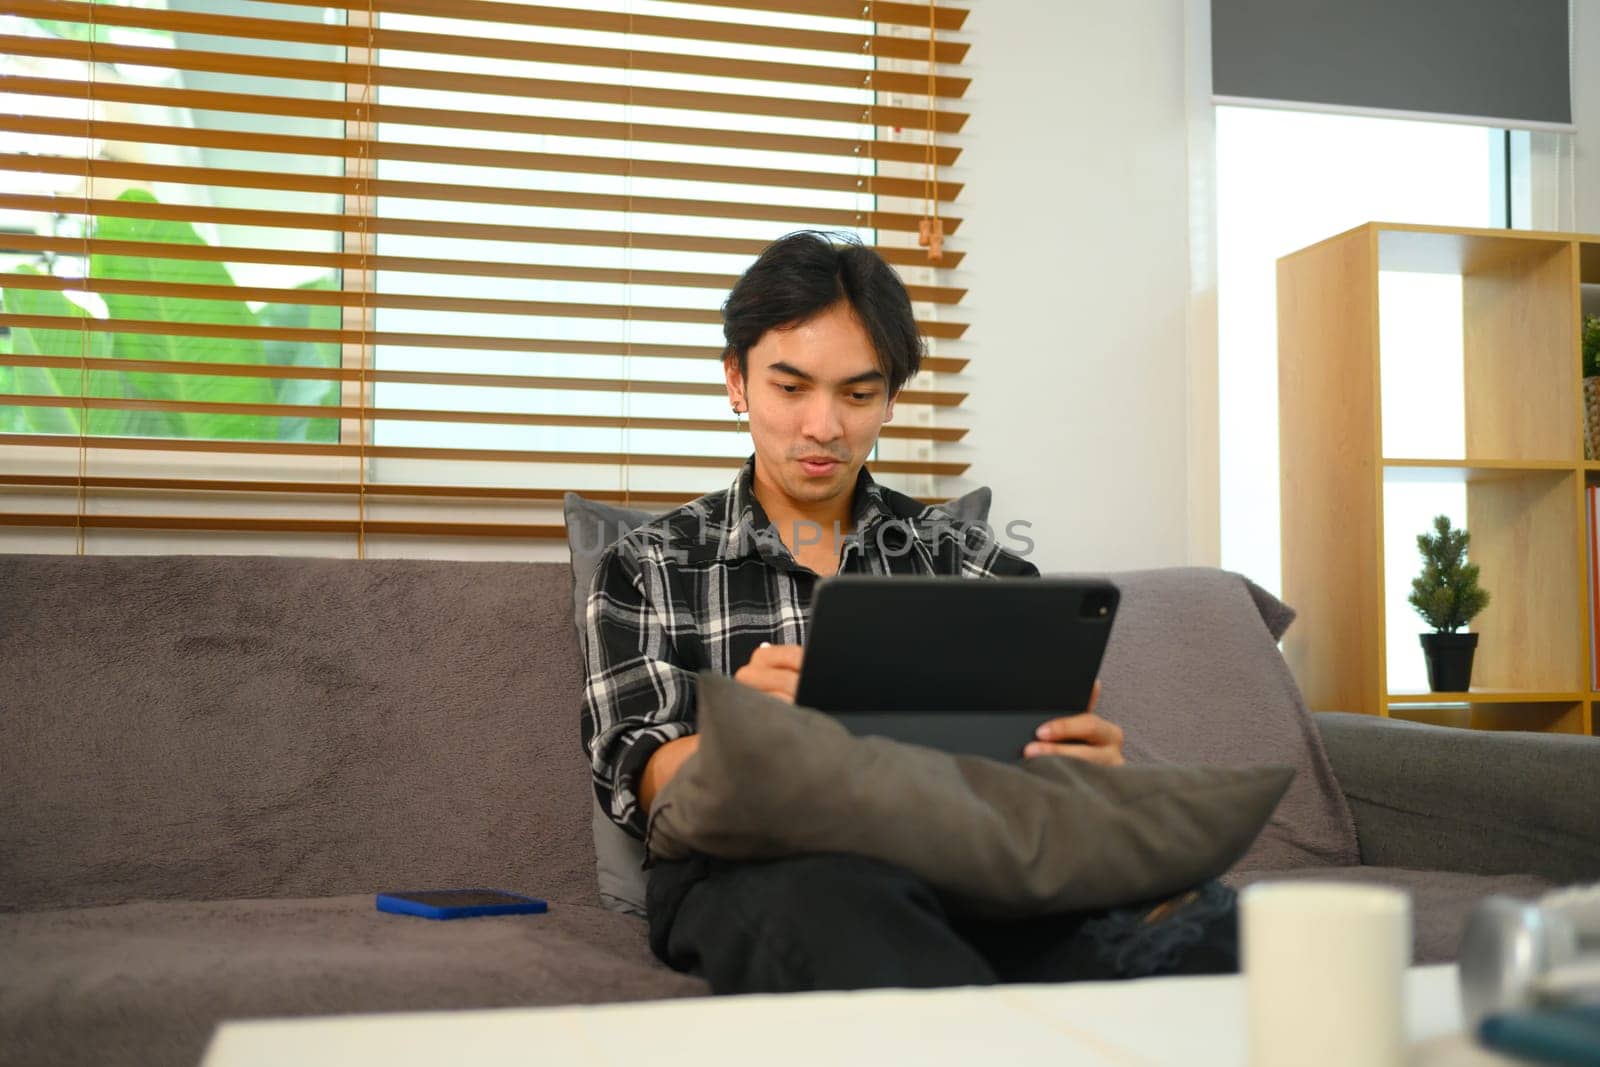 Smiling Young man watching video on digital tablet while relaxing on a couch at home.